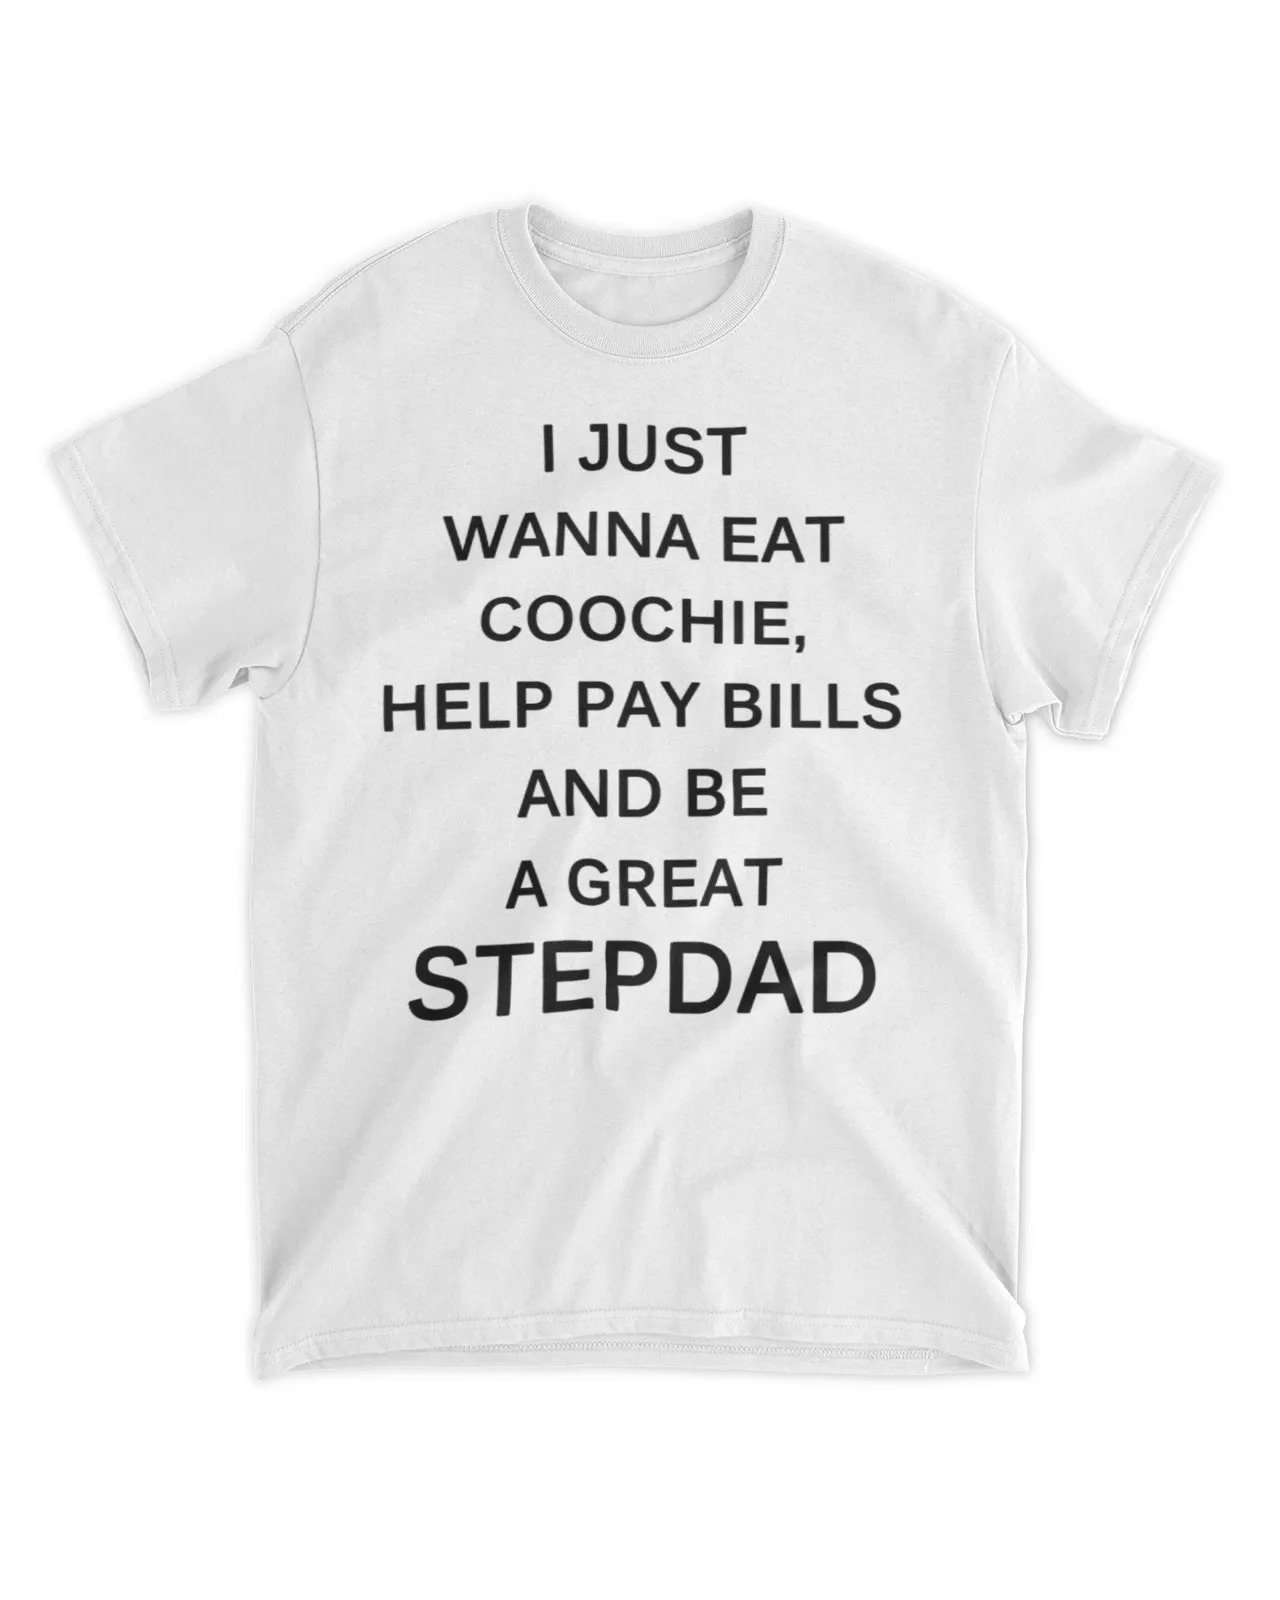  I just wanna eat coochie help pay bills and be a great stepdad shirt